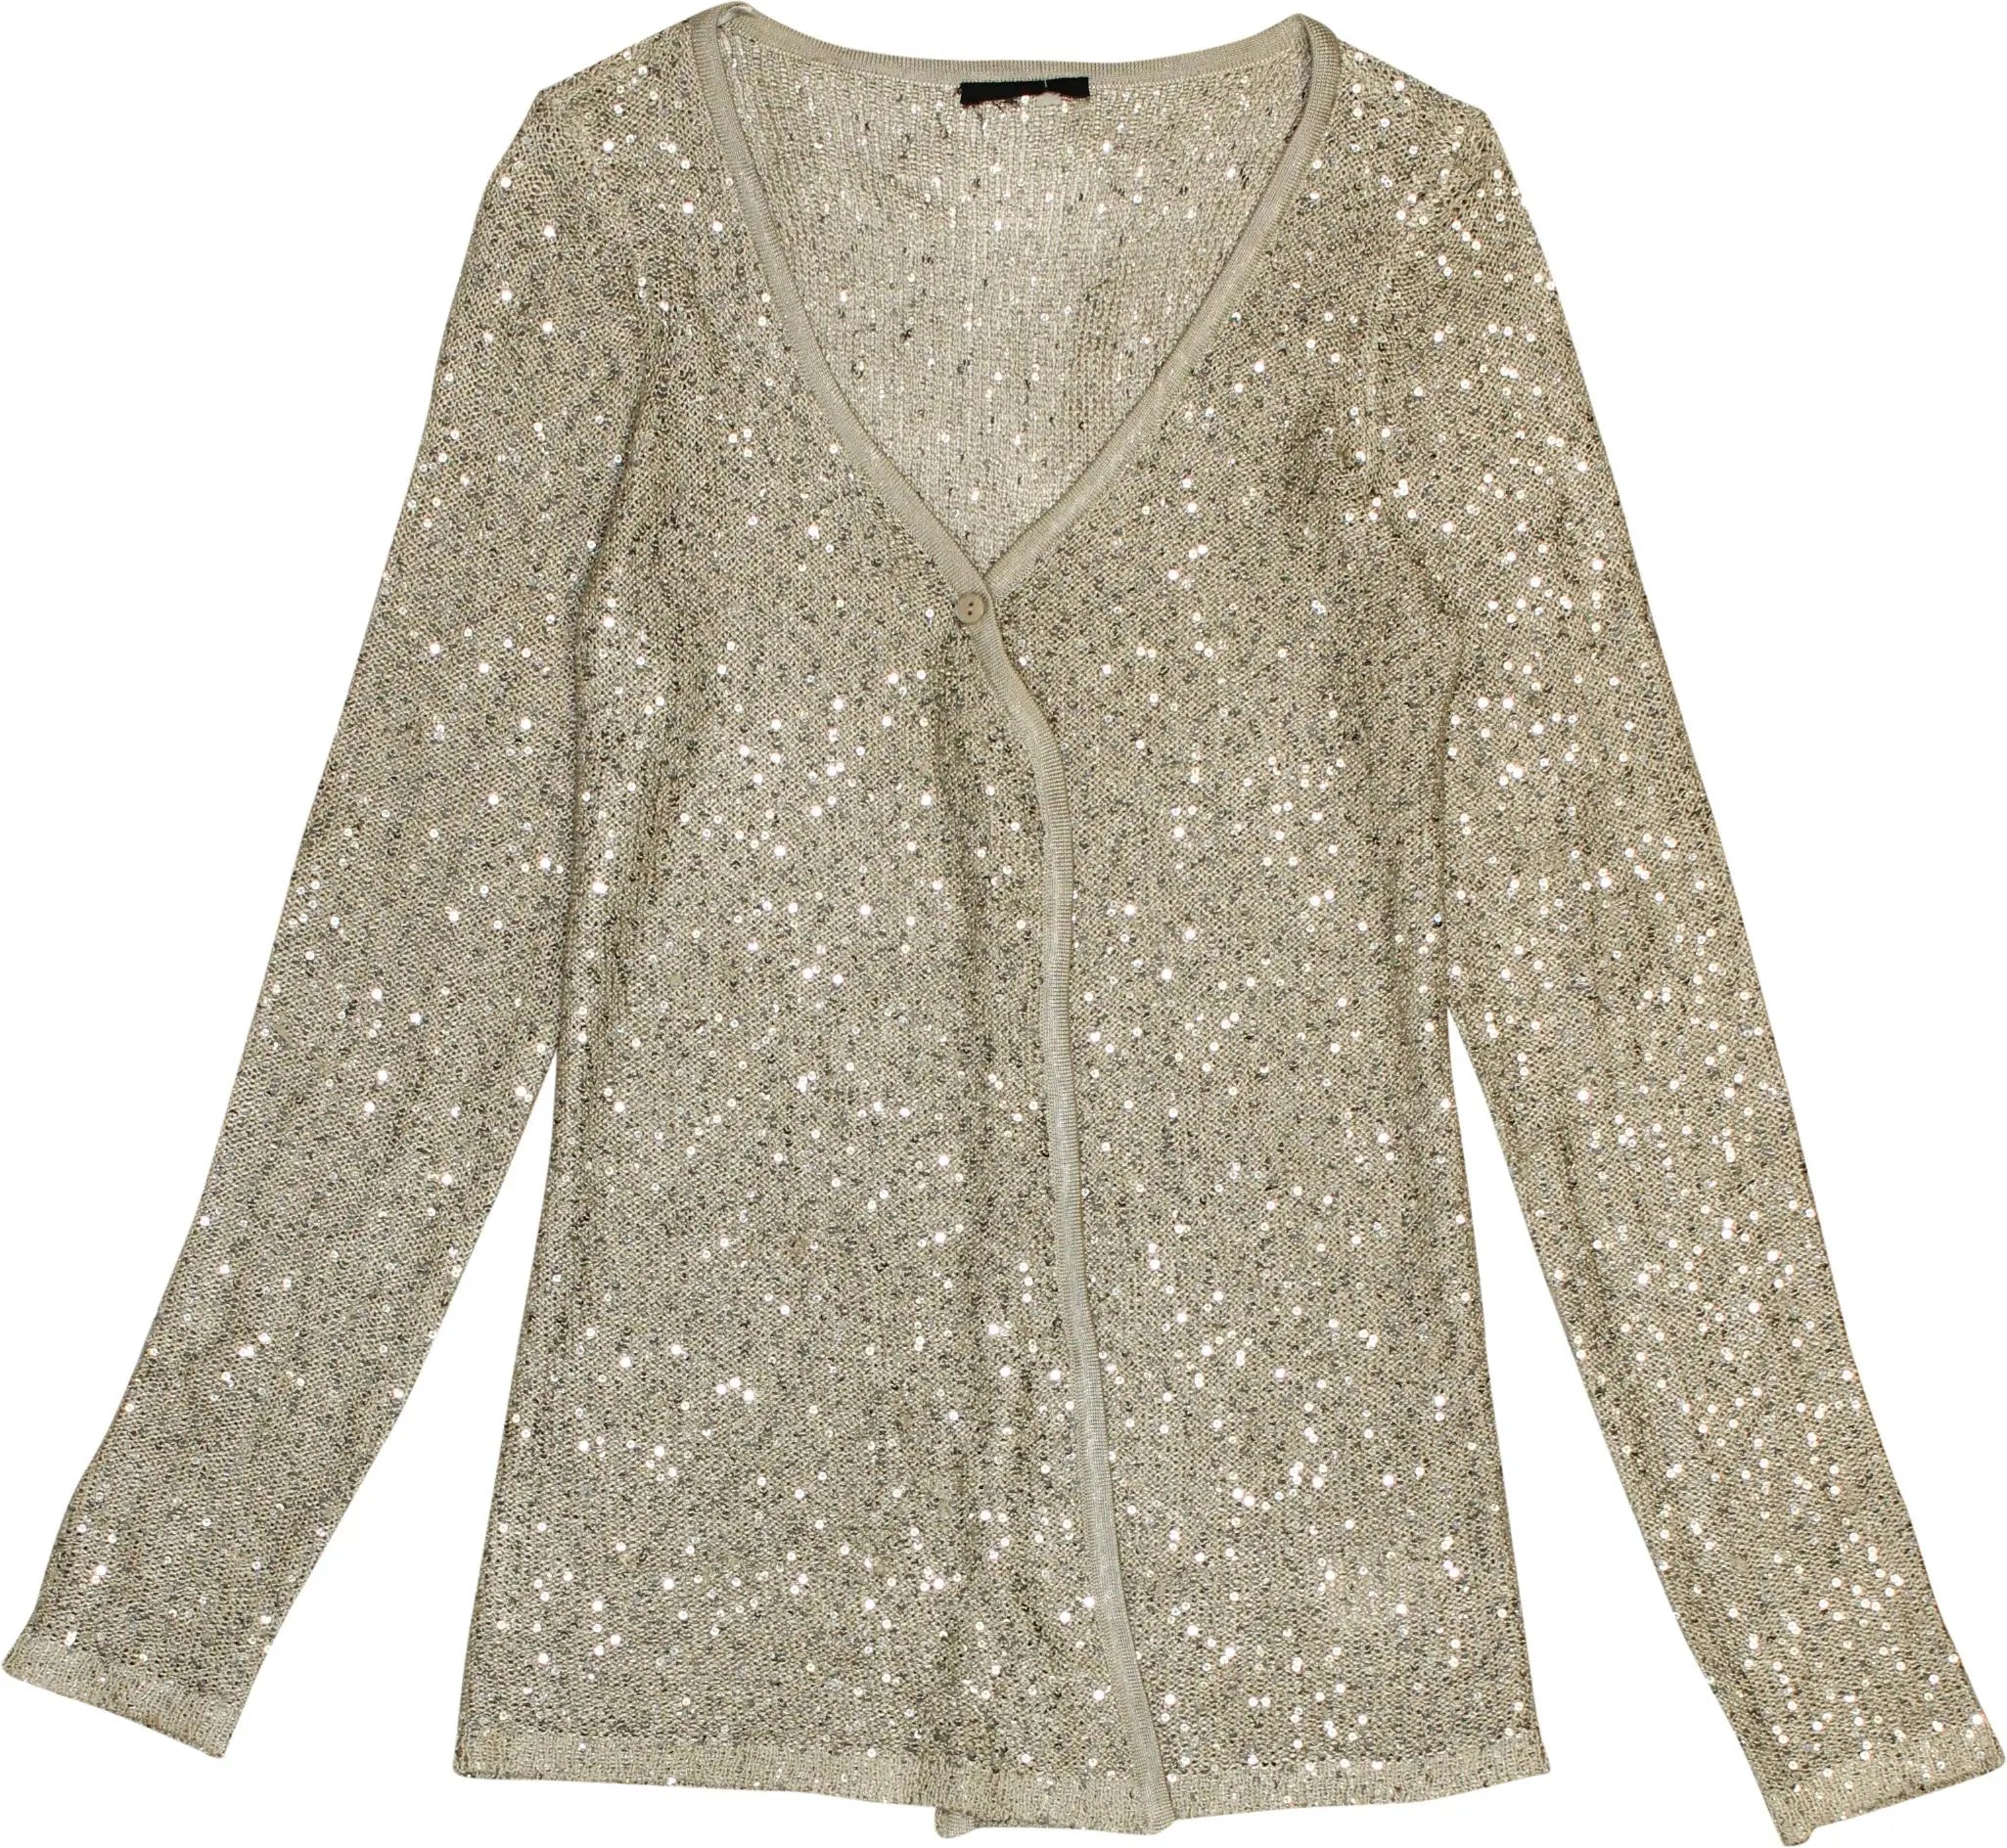 Unknown - Gold Sequin Cardigan- ThriftTale.com - Vintage and second handclothing